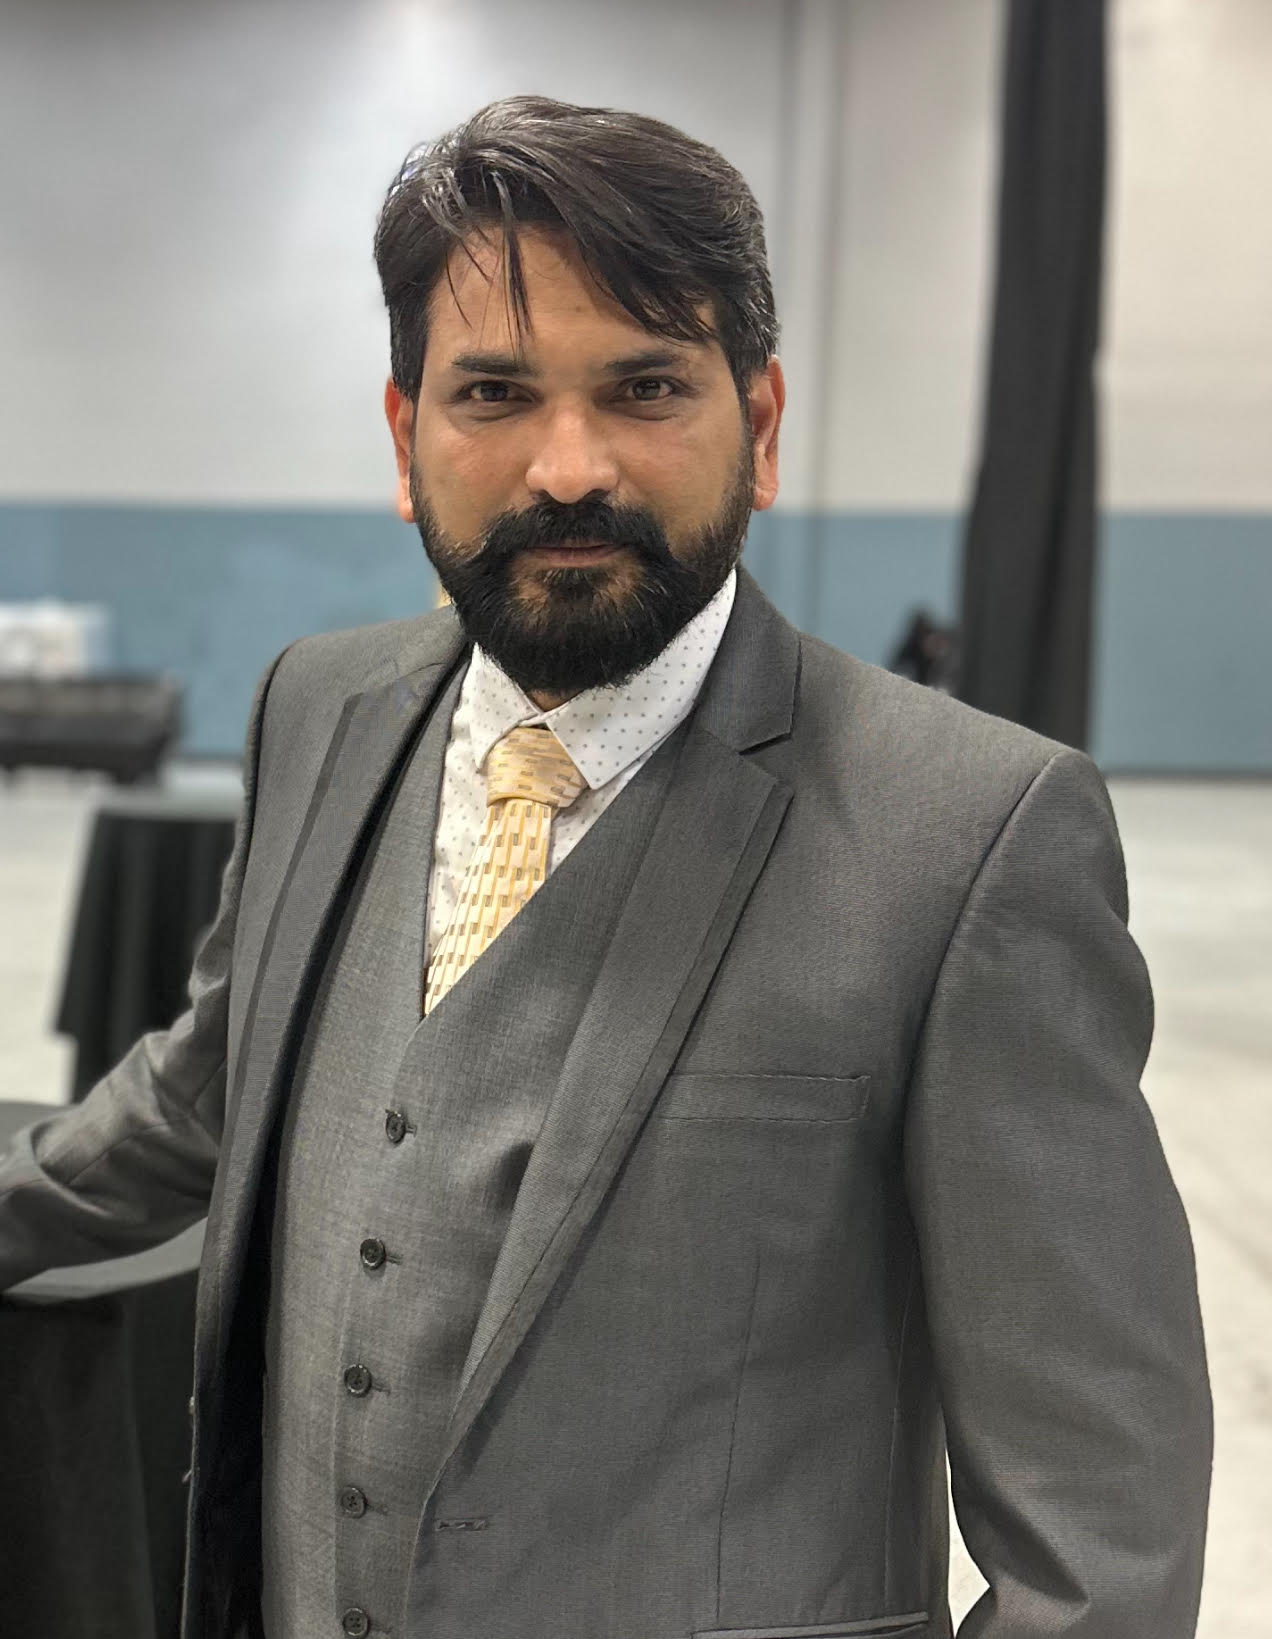 Venky Musti is a Cochair for the Stage/Venue committees of Mata 2020 Atlantic City